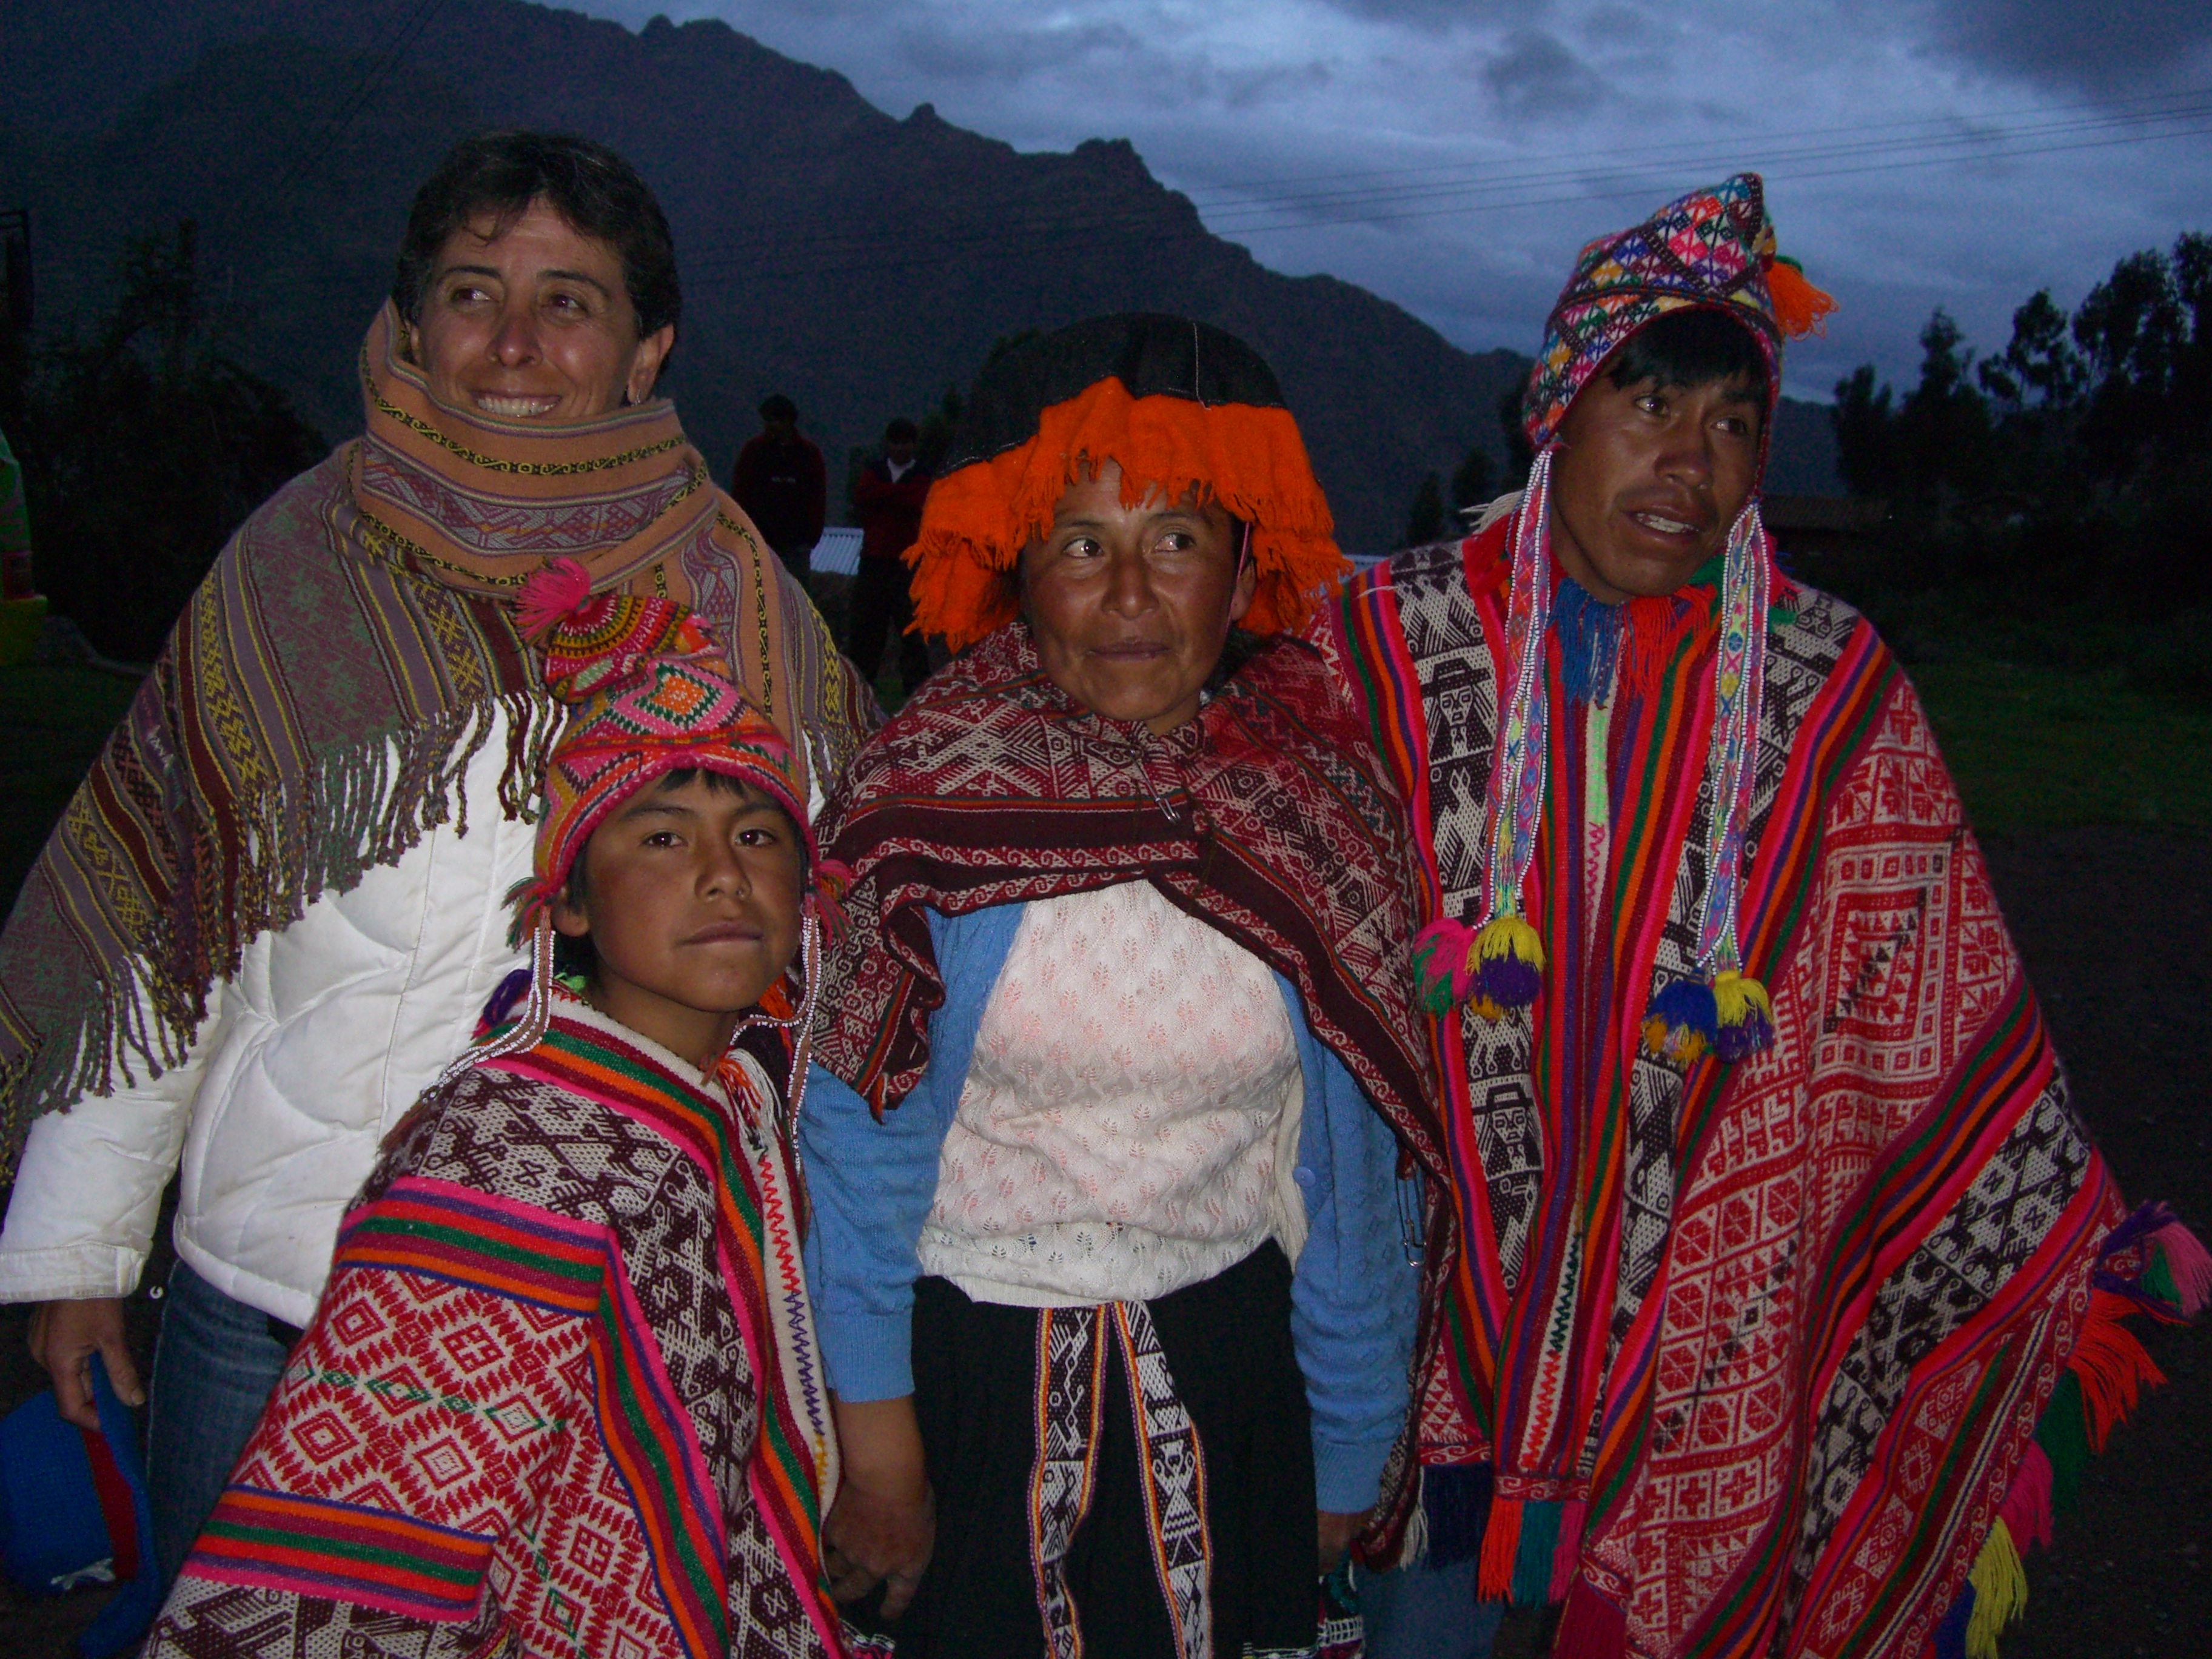 On location in the Andes (Sacred Valley of the Incas)